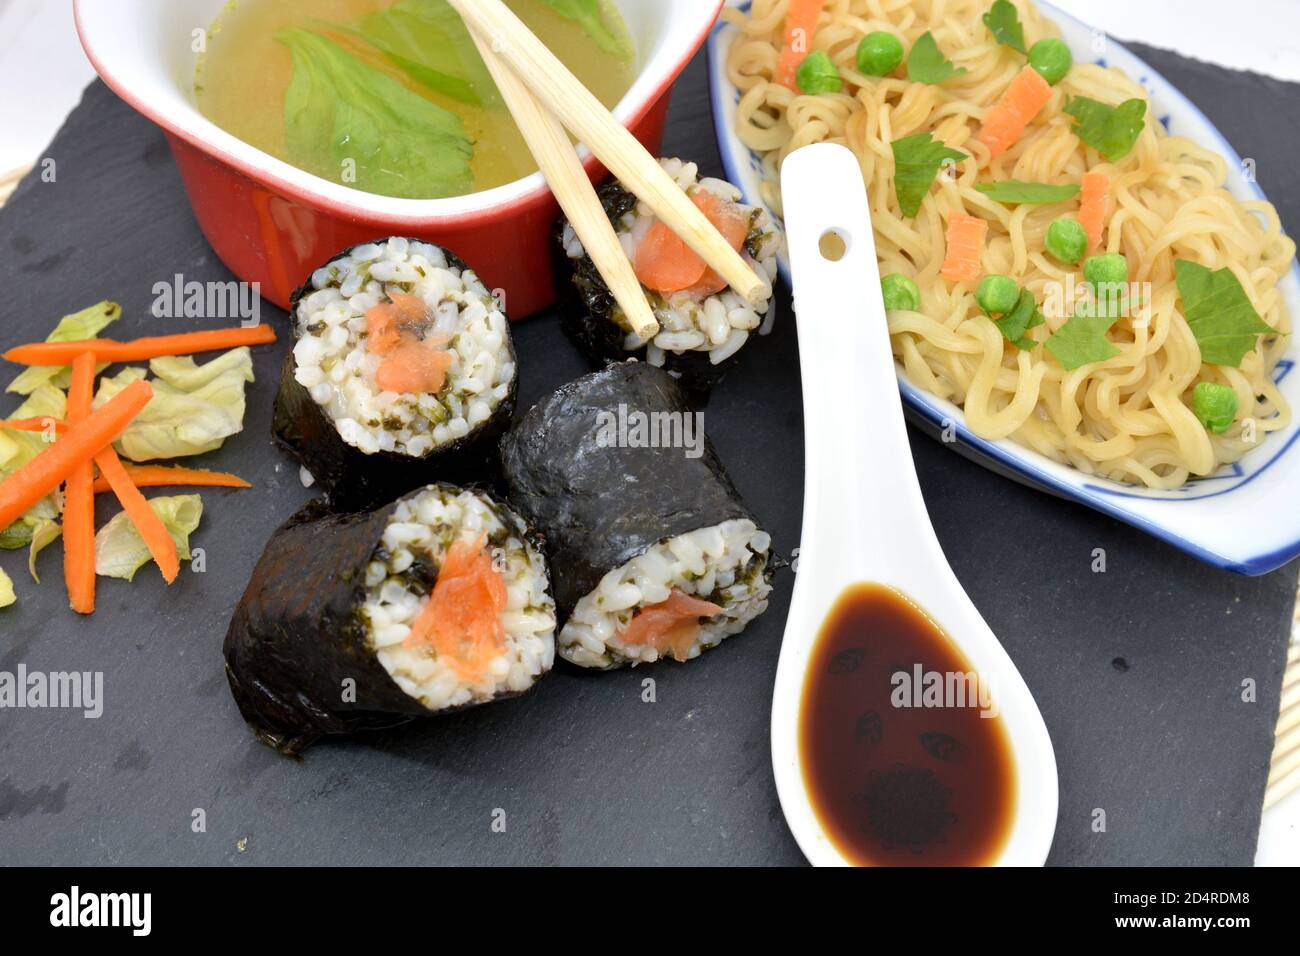 japanese food noodles soup rice sushi vegetables fish chicken asiatic food Stock Photo